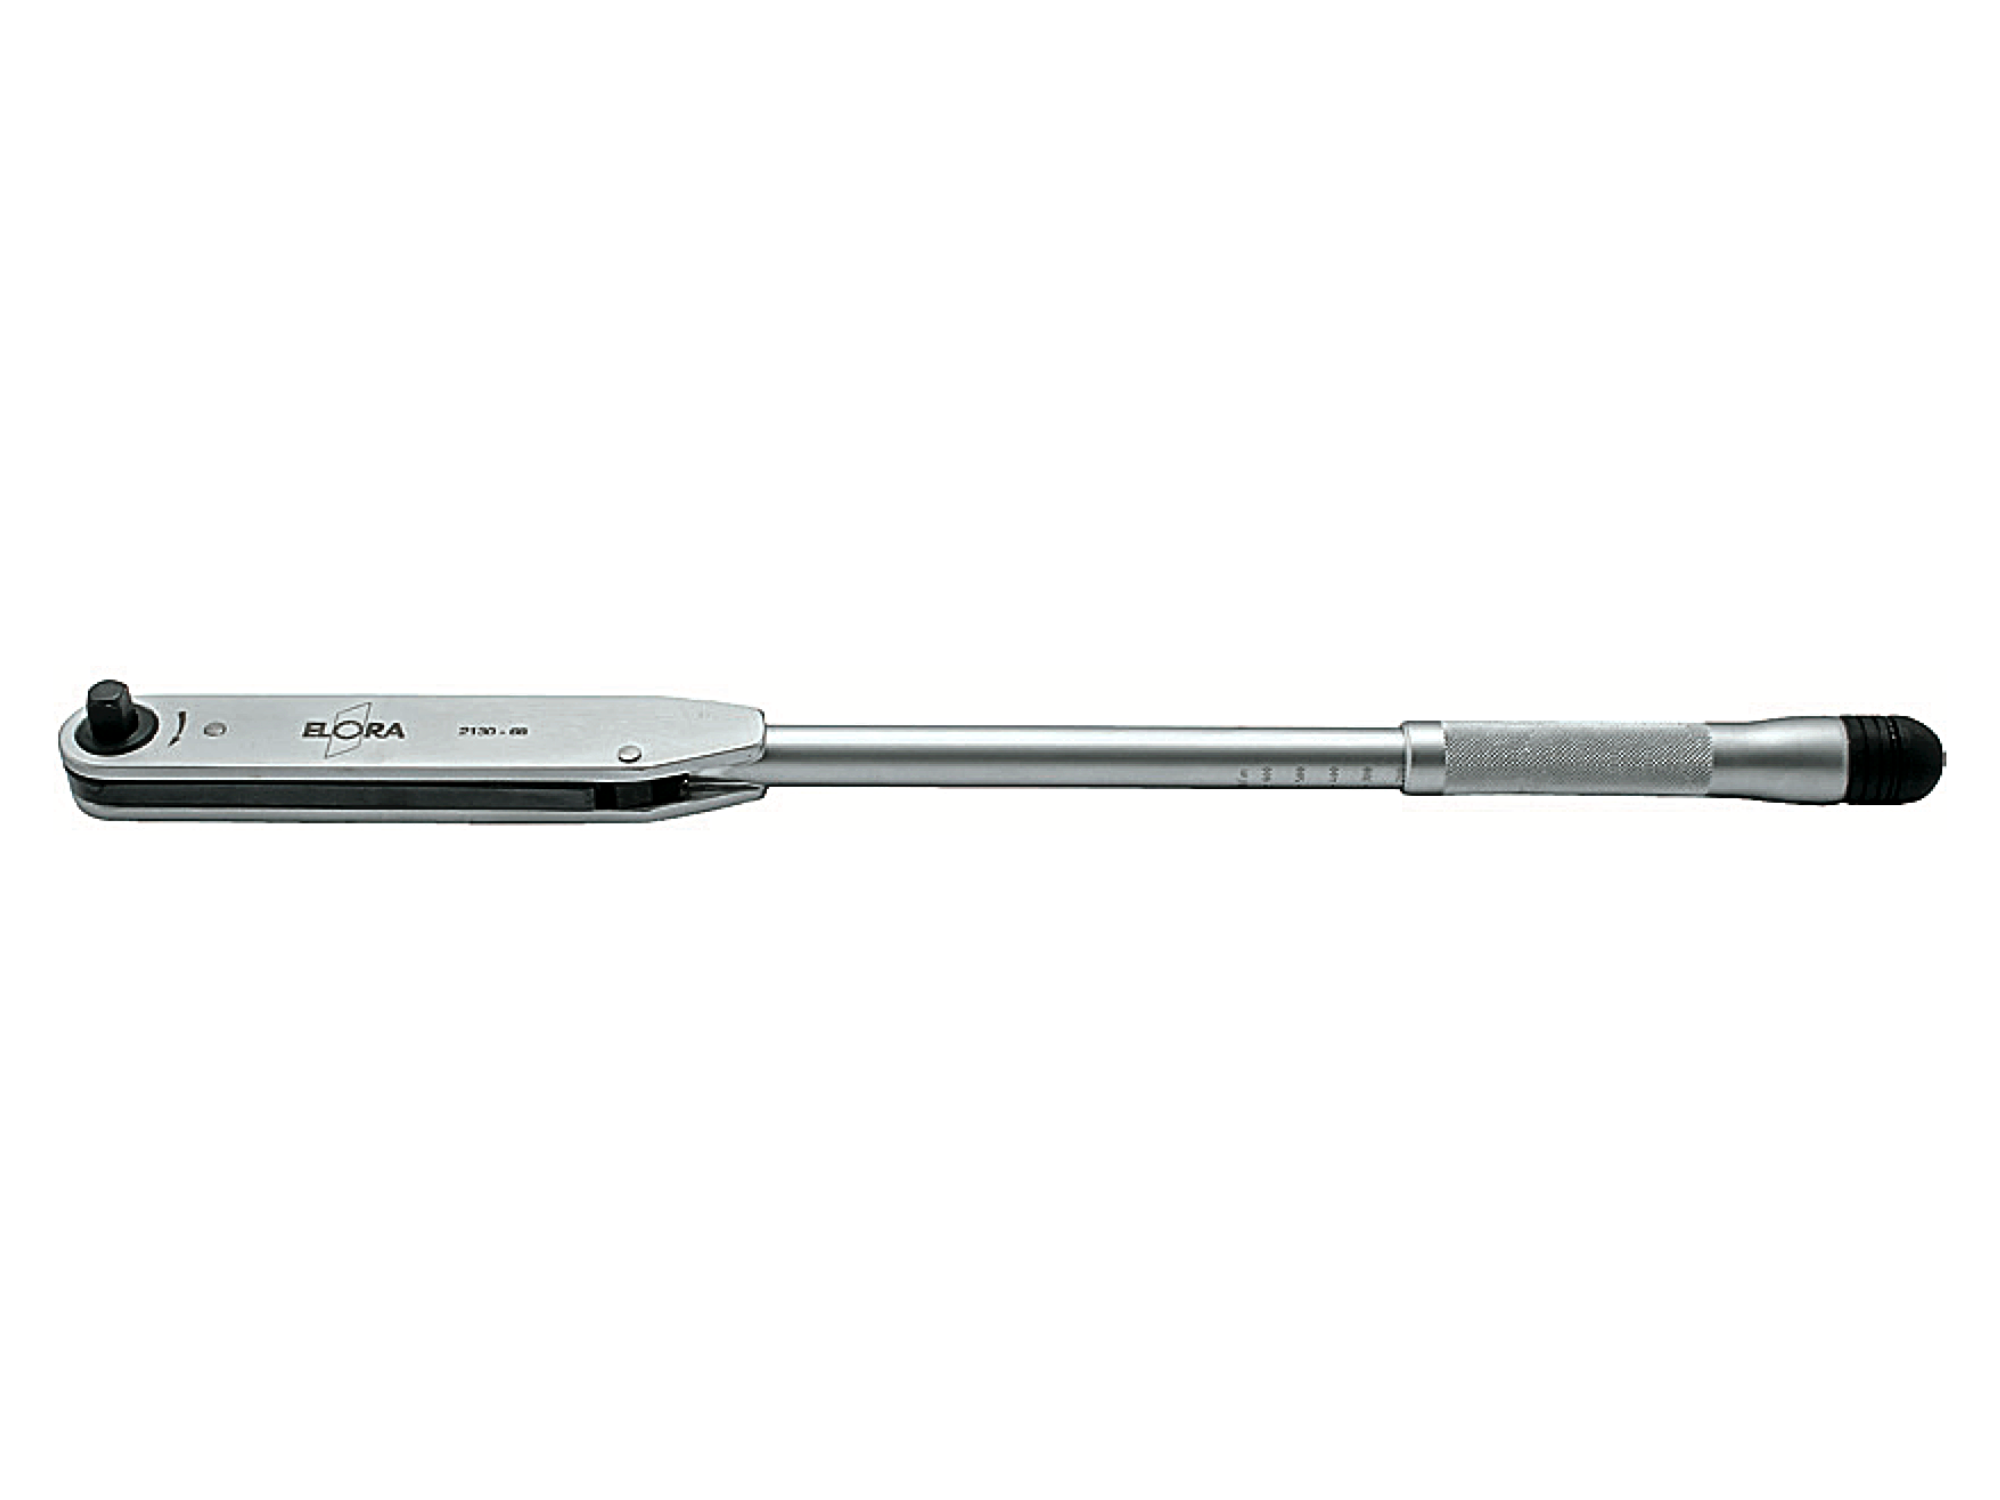 ELORA 2130-11/33/68 3/8" Torque Wrench (ELORA Tools) - Premium 3/8" Torque Wrench from ELORA - Shop now at Yew Aik.